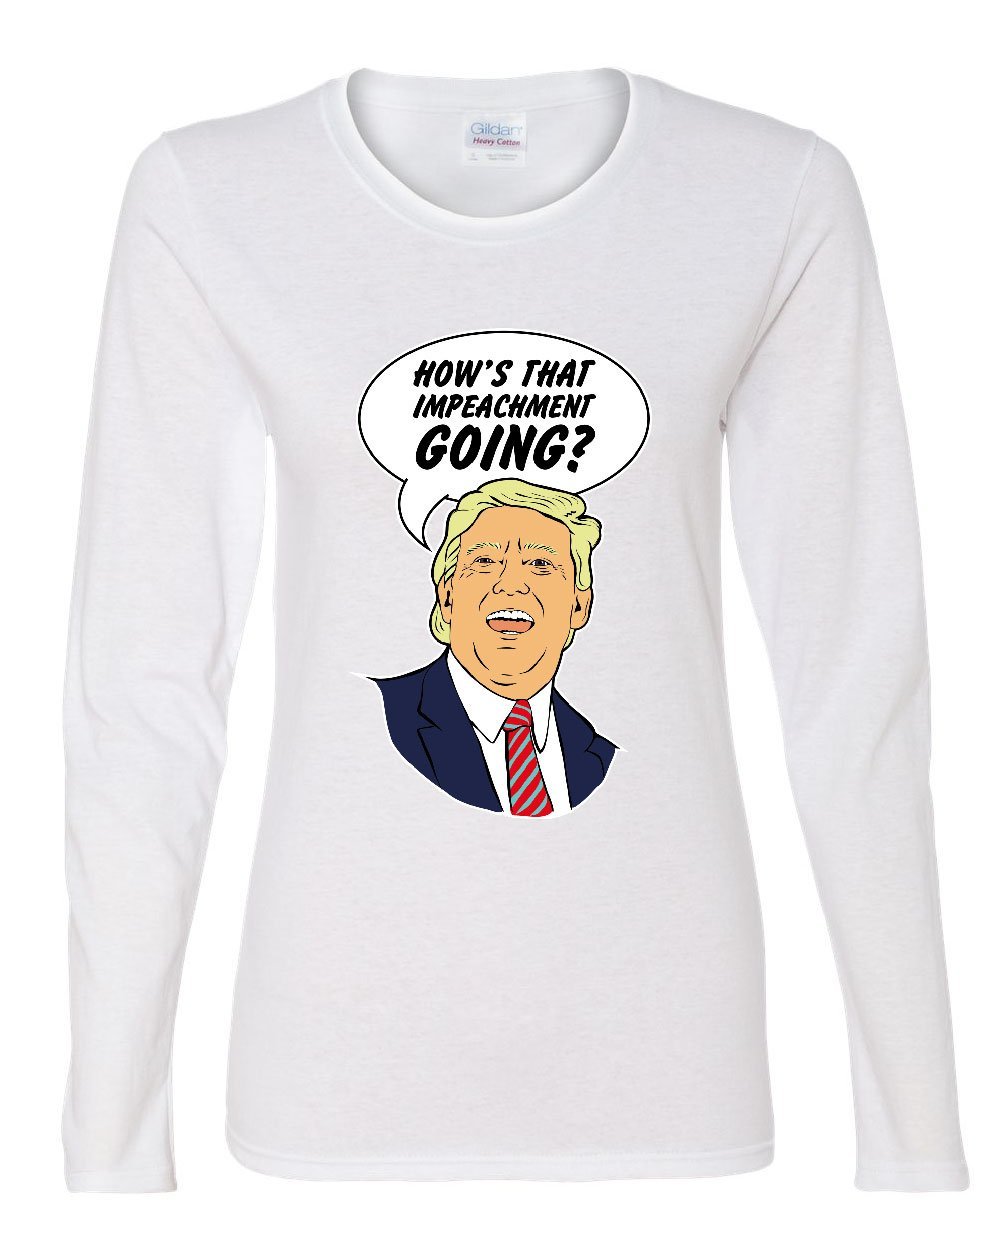 How's That Impeachment Going Long Sleeve T-Shirt Funny Donald Trump 2020 KAG Tee 